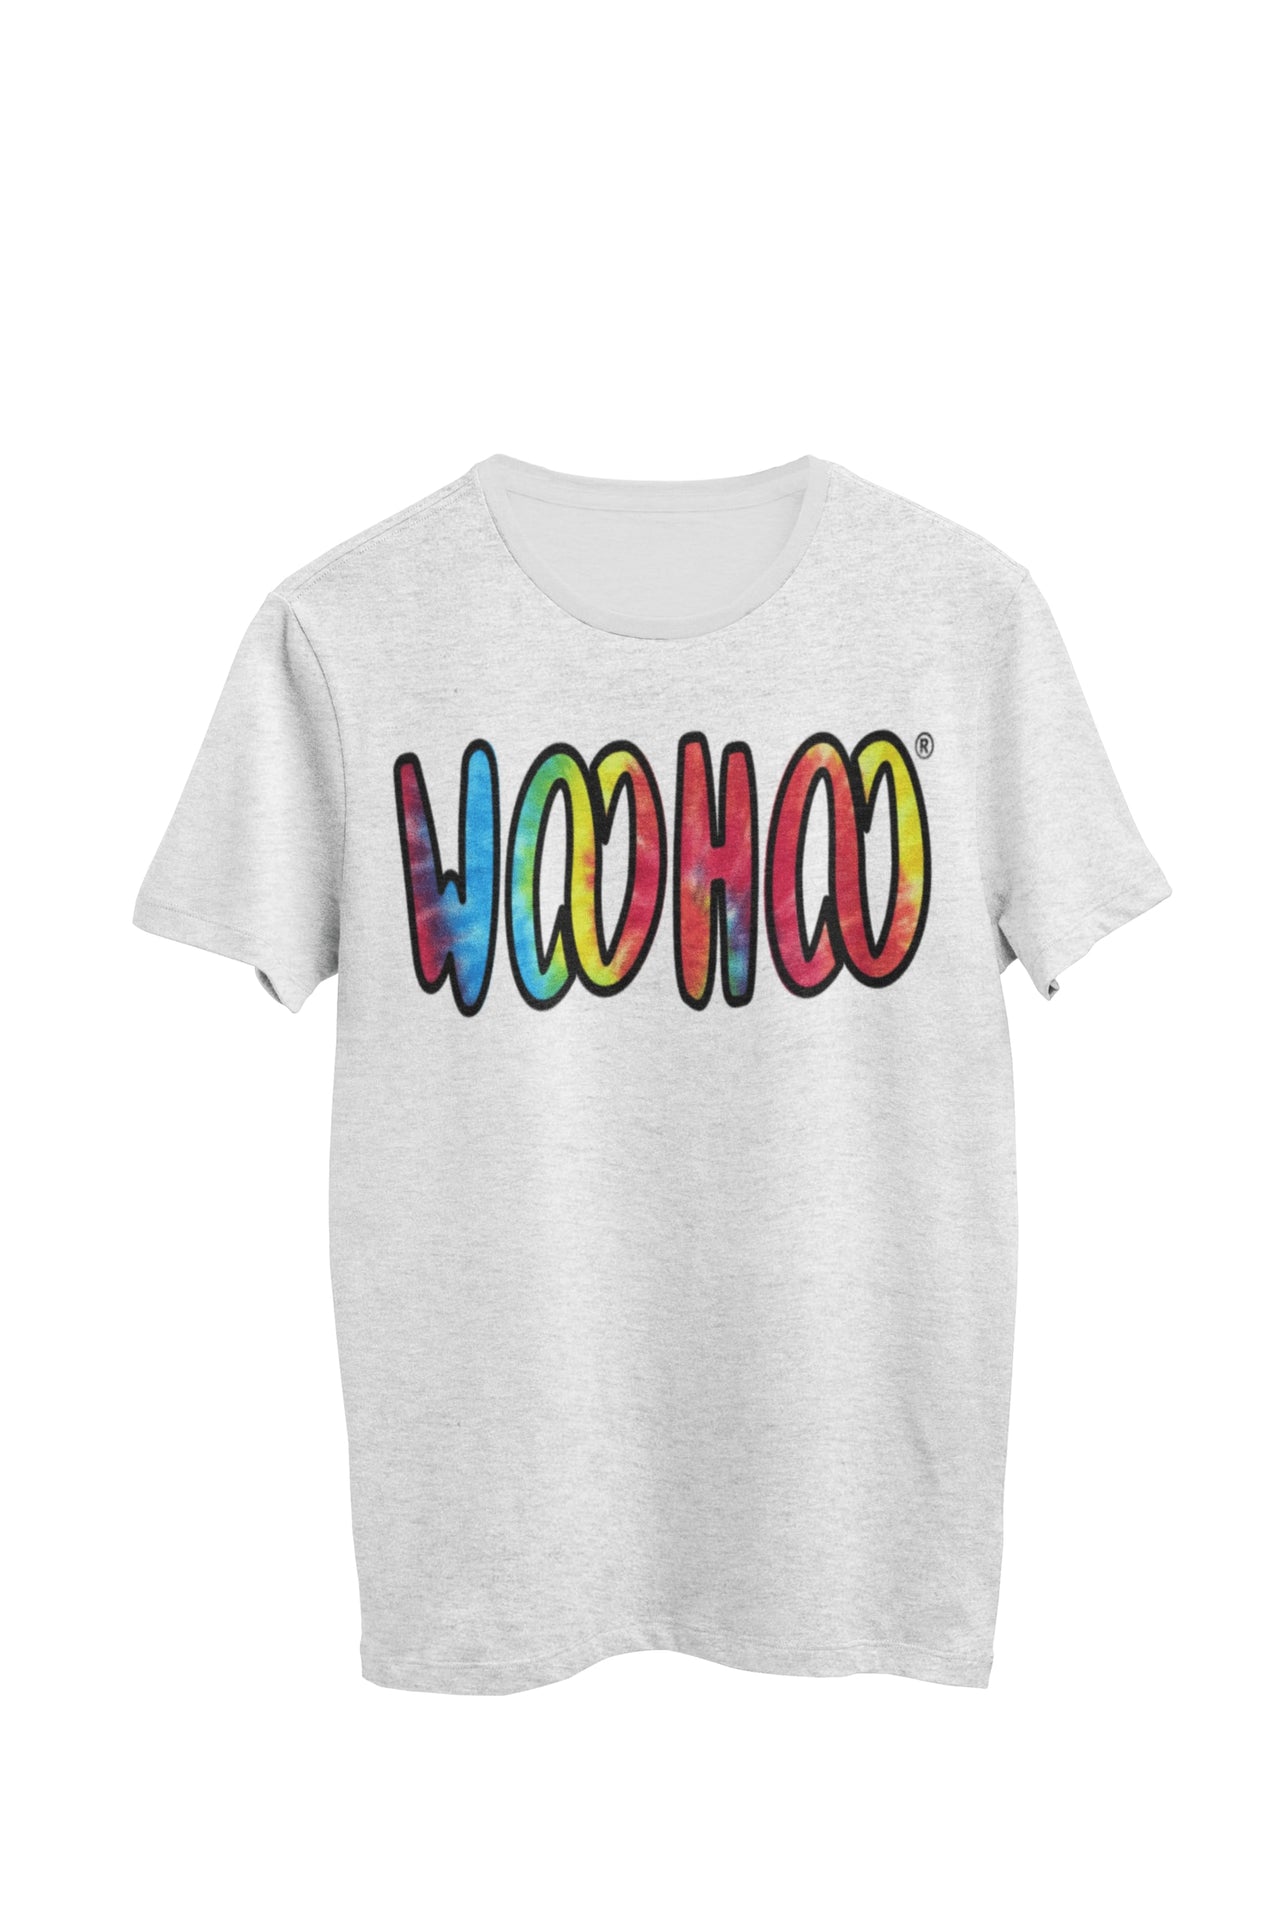 Heather gray unisex t-shirt designed by WooHoo Apparel. The design features a larger 'woohoo' font with tie-dye inside the outline, called  Aerial..